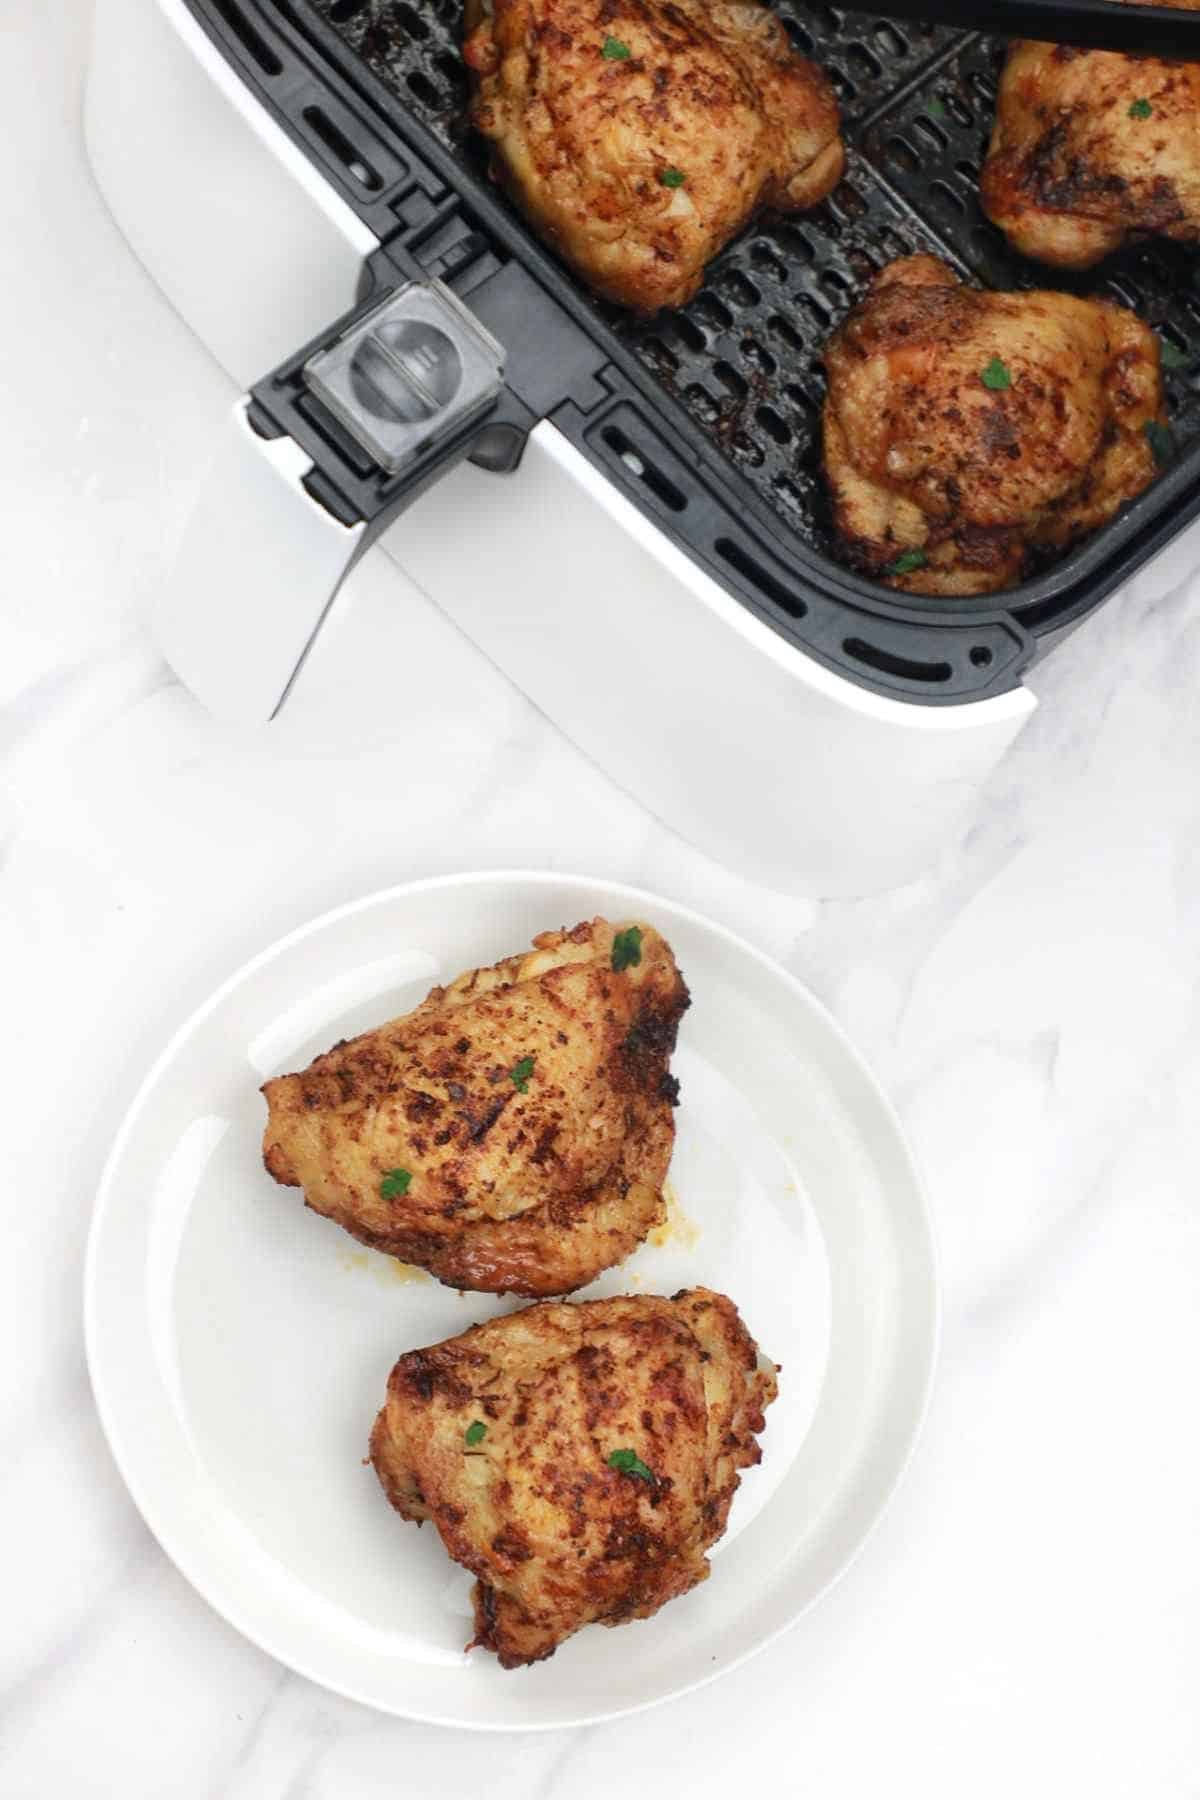 2 pieces served on a plate and the rest displayed in the air fryer.